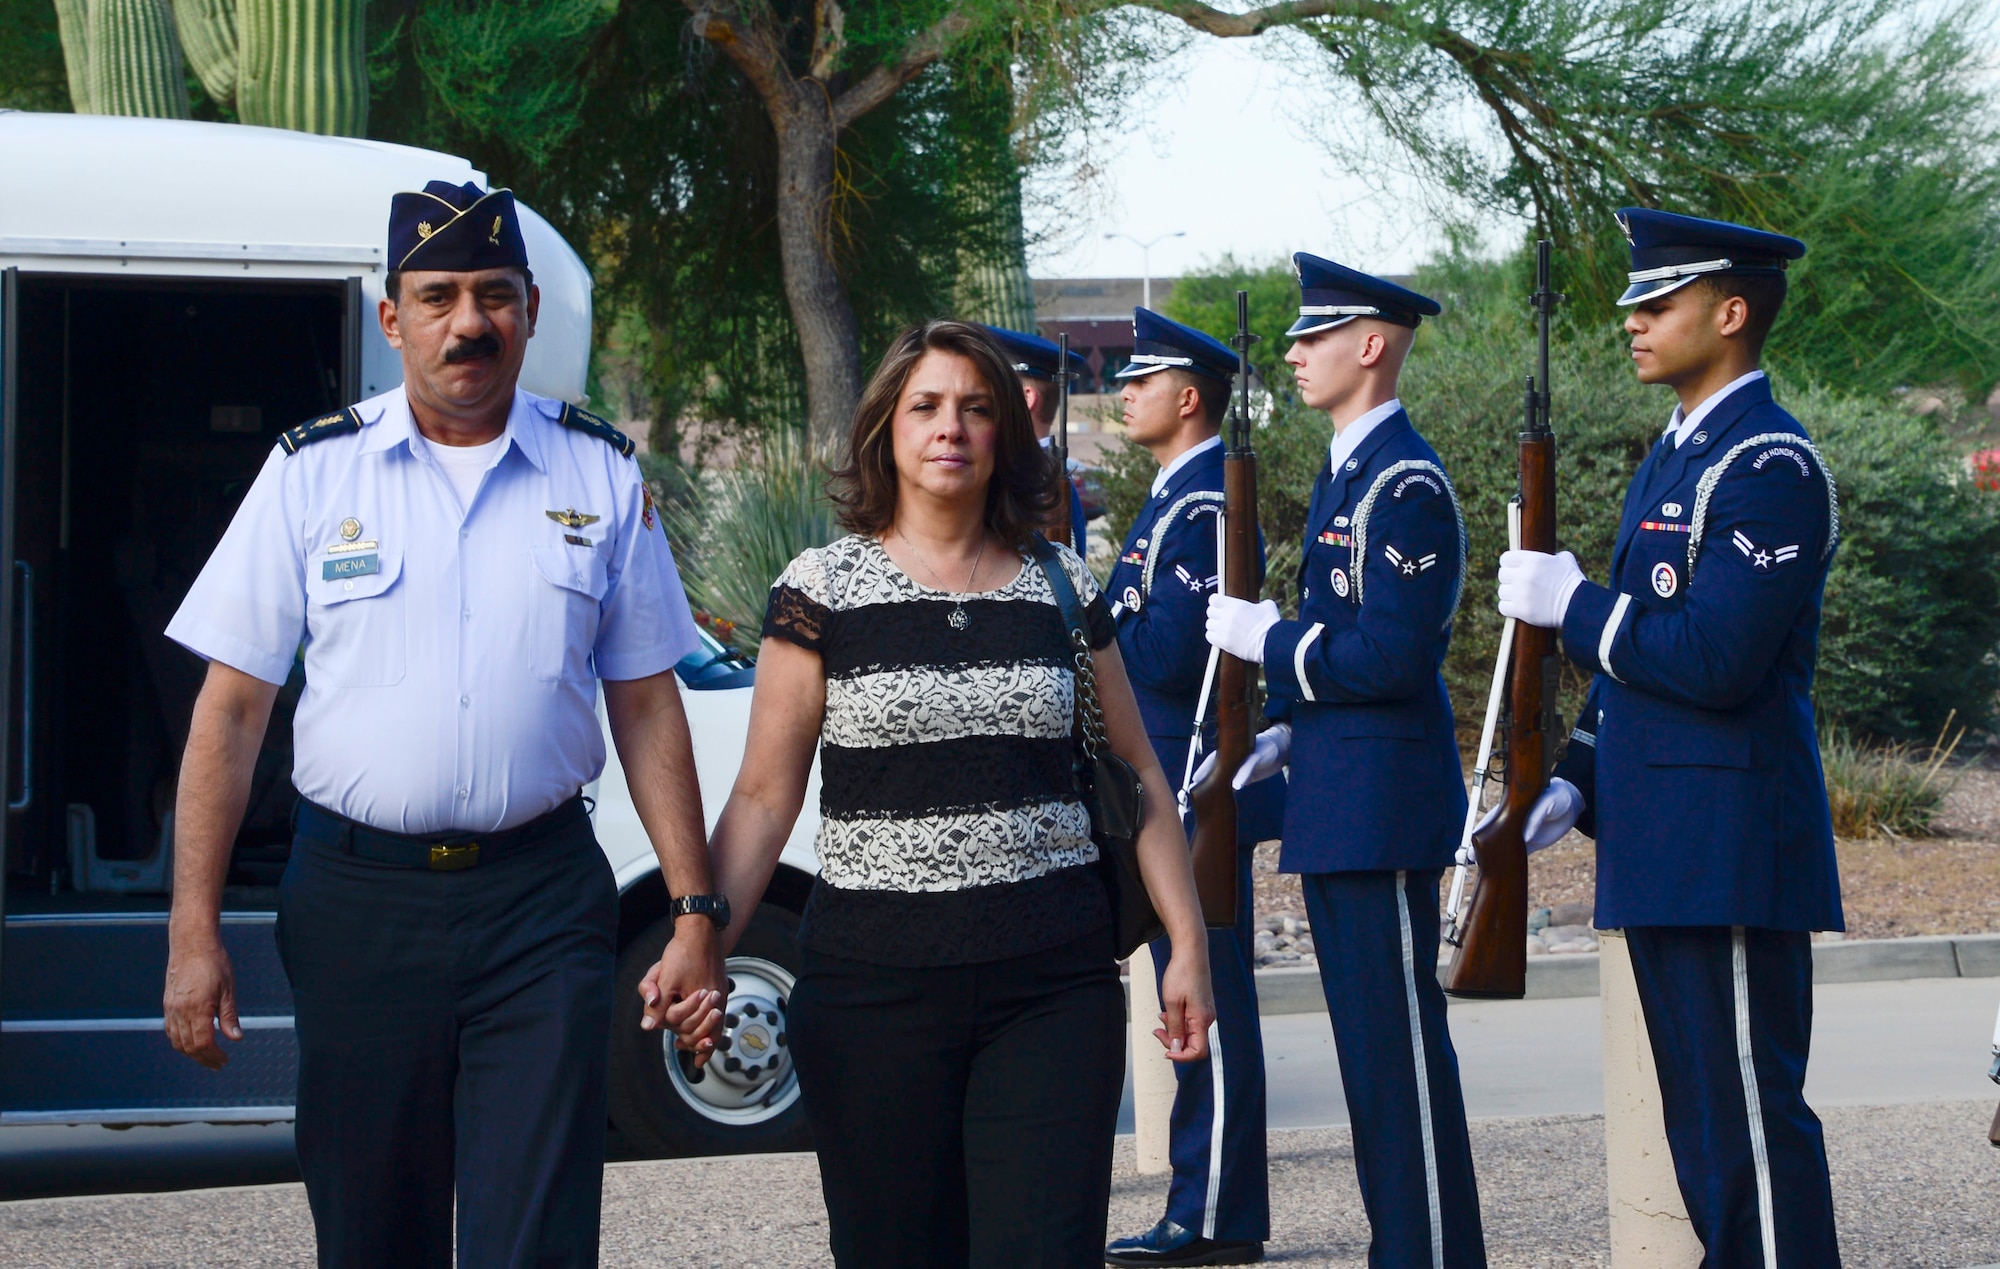 Brig. Gen. Carlos Mena, Chief of Staff of the El Salvadorian air force, and his wife Maria Mena walk through an honor cordon at 12th Air Force (Air Forces Southern), Davis-Monthan Air Force Base, Ariz., Sept. 3, 2014.  The El Salvadorian delegation was invited to visit AFSOUTH this week to discuss upcoming U.S. and El Salvadorian political-military integration subject matter expert exchanges. (USAF photo by Tech. Sgt. Heather R. Redman/Released) 